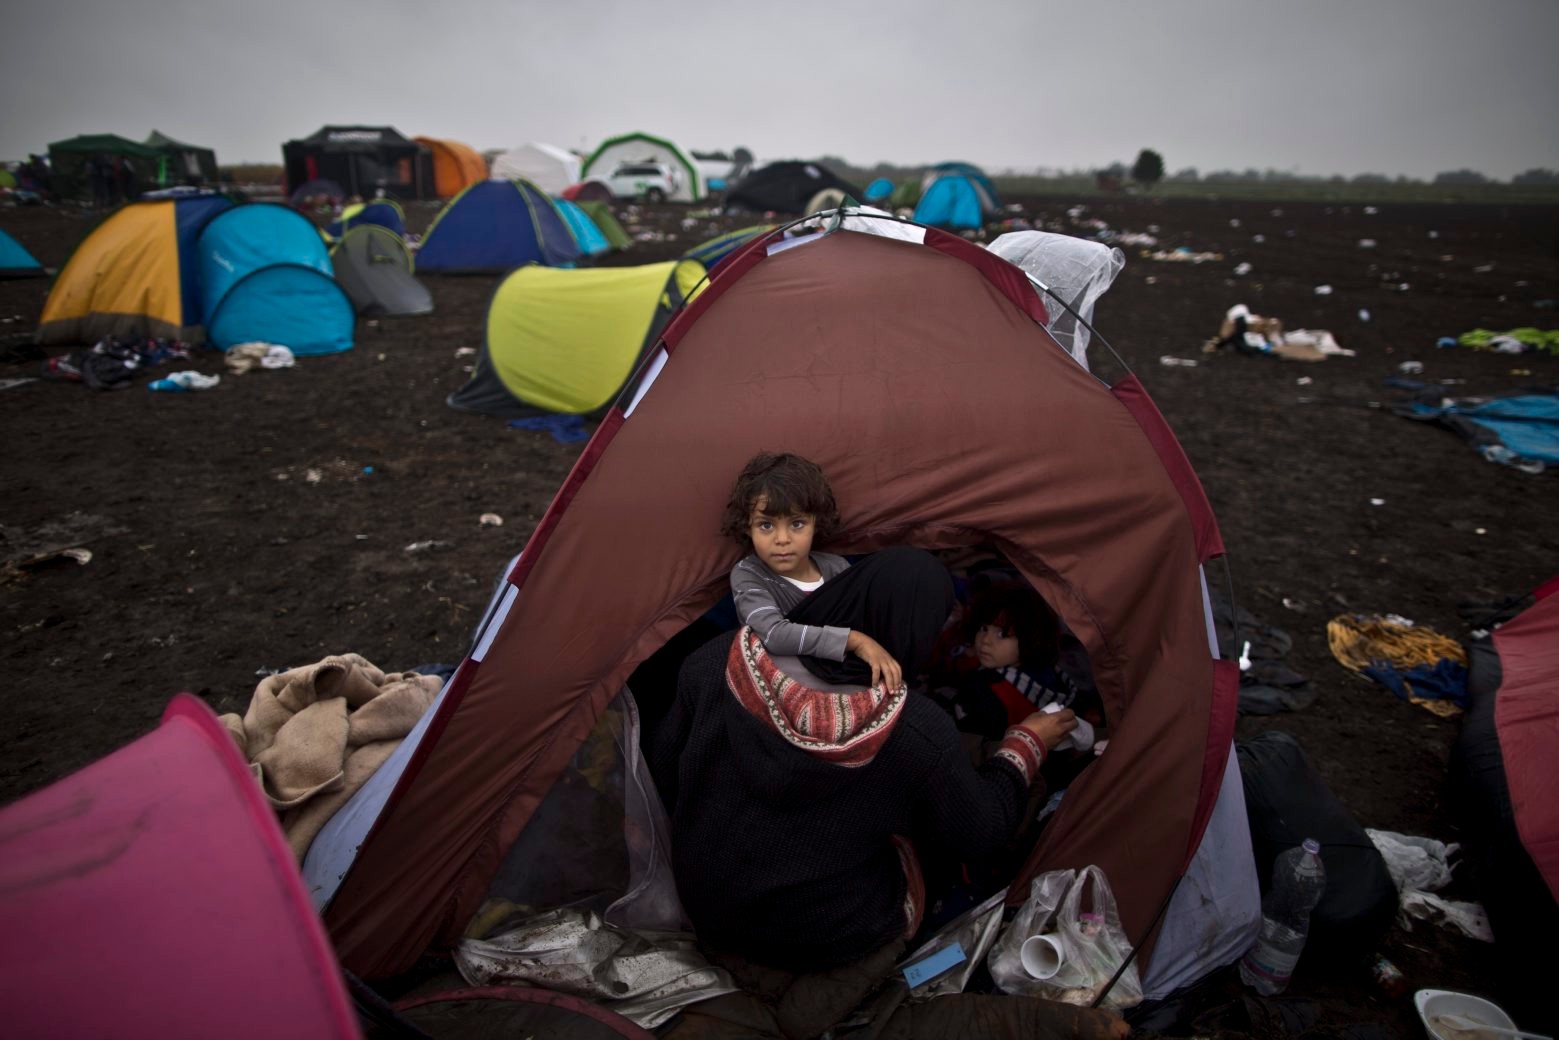 Syrian refugee child Zaid Hussein, 4, is held by his mother while sitting inside their tent at a makeshift camp for asylum seekers in Roszke, southern Hungary, Friday, Sept. 11, 2015. EU officials and human rights groups say they've been disappointed by the animosity toward asylum-seekers in countries from which hundreds of thousands of people fled communist dictatorships just decades ago. (AP Photo/Muhammed Muheisen) Hungary Migrants